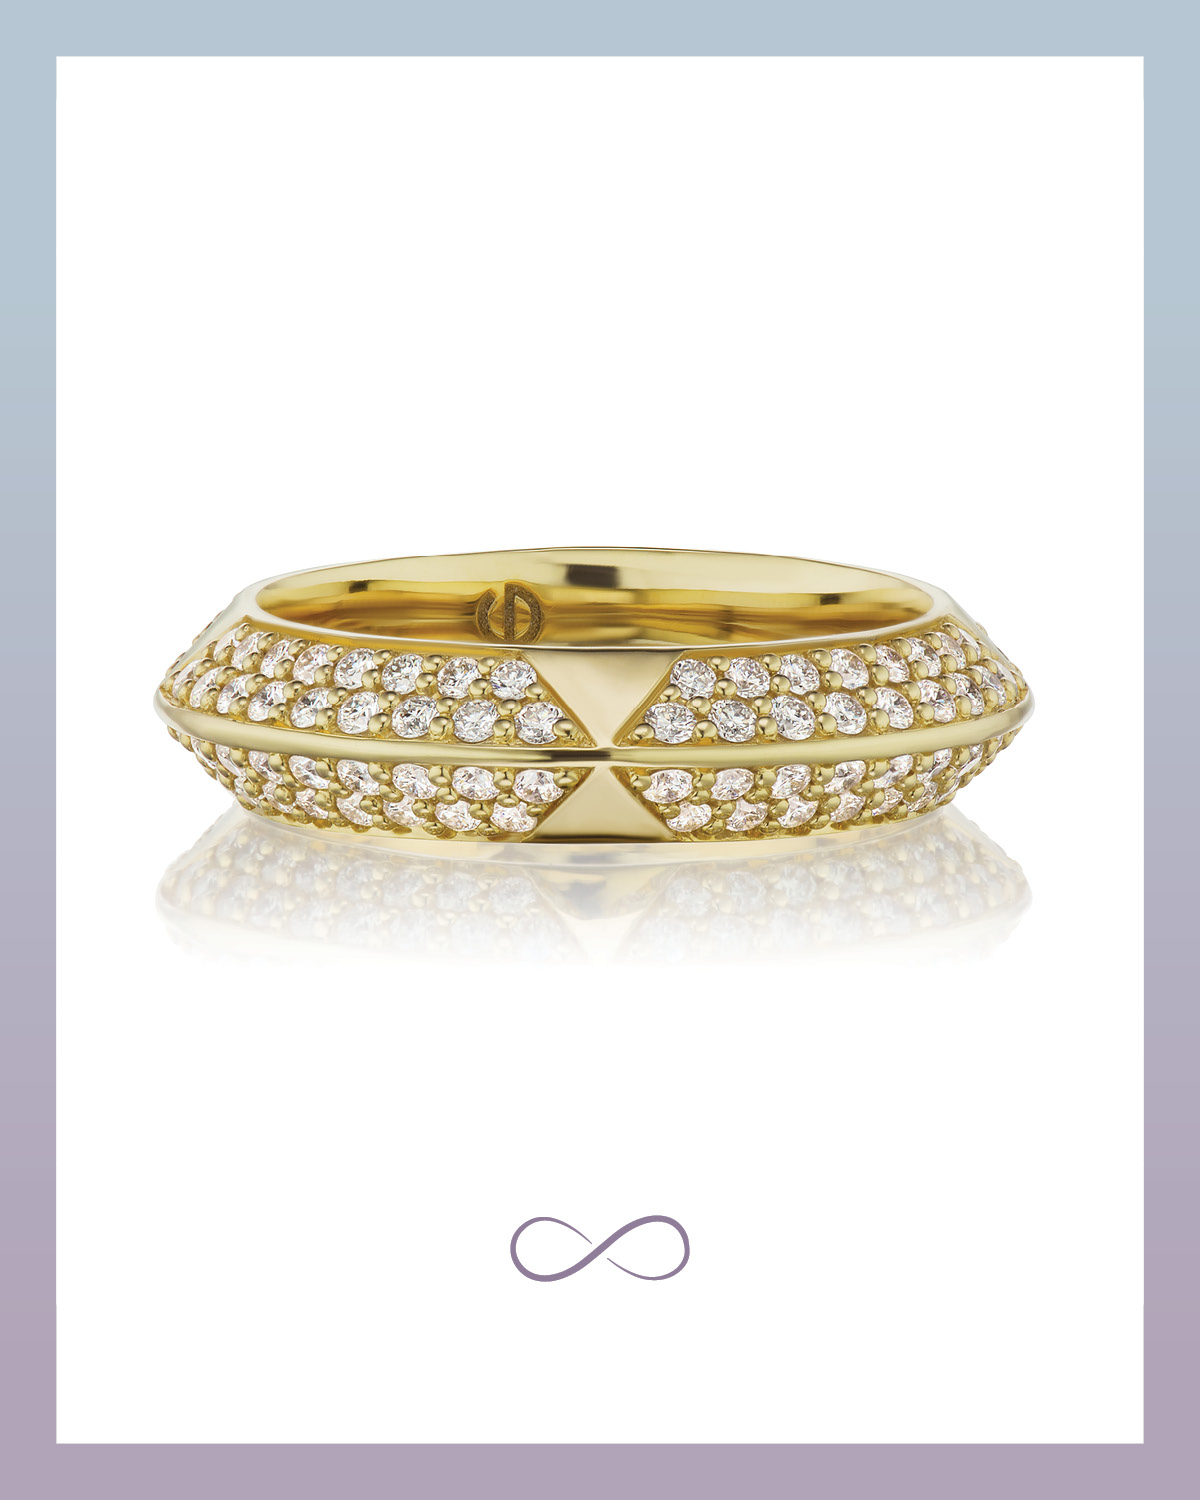 Rosa Two row pave eternity band with diamonds from Harwell Godfrey set in yellow gold